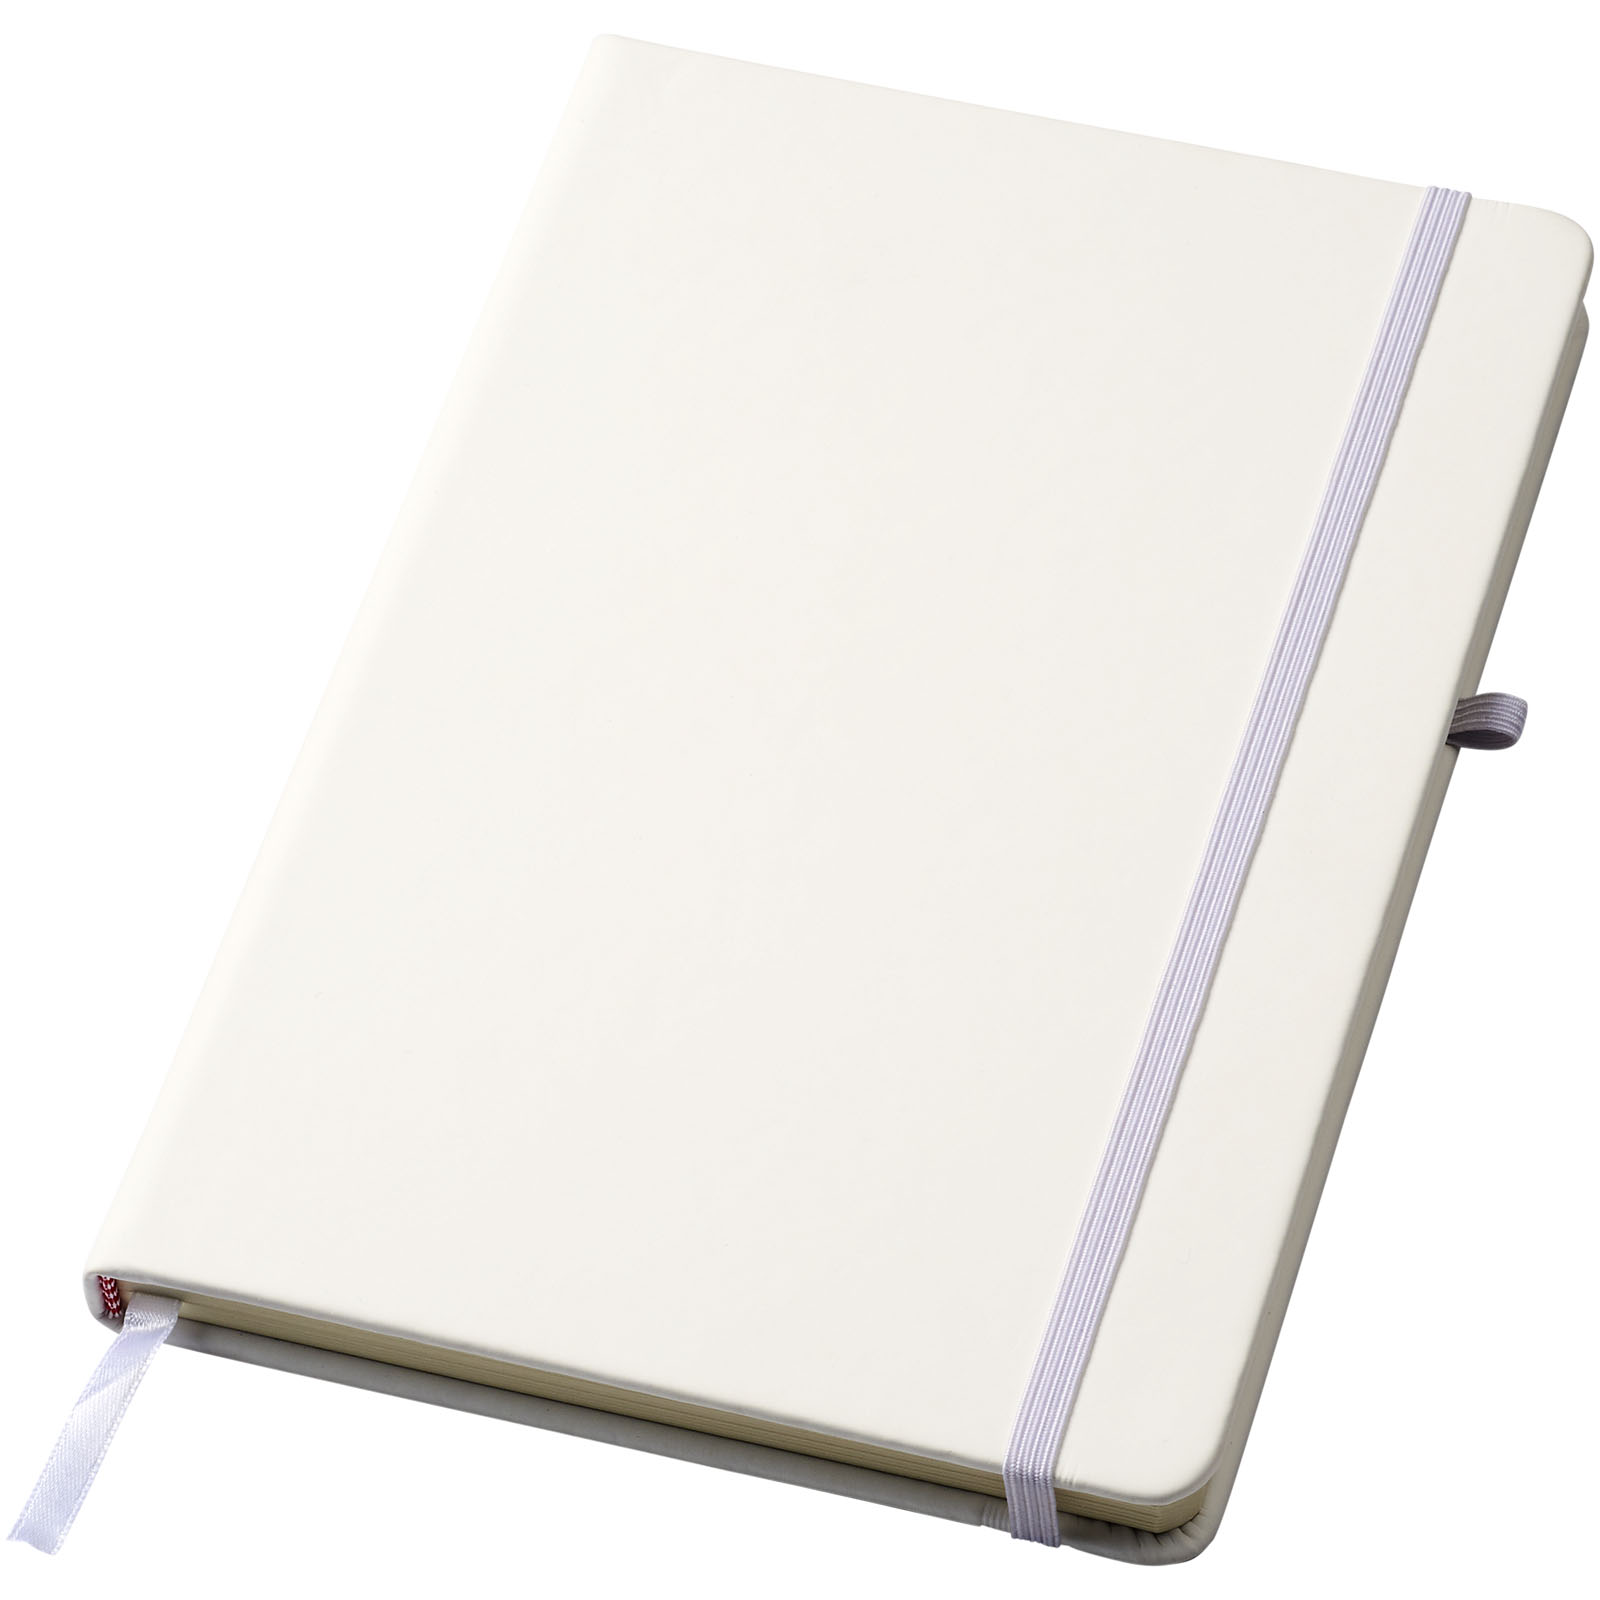 Hard cover notebooks - Polar A5 notebook with lined pages